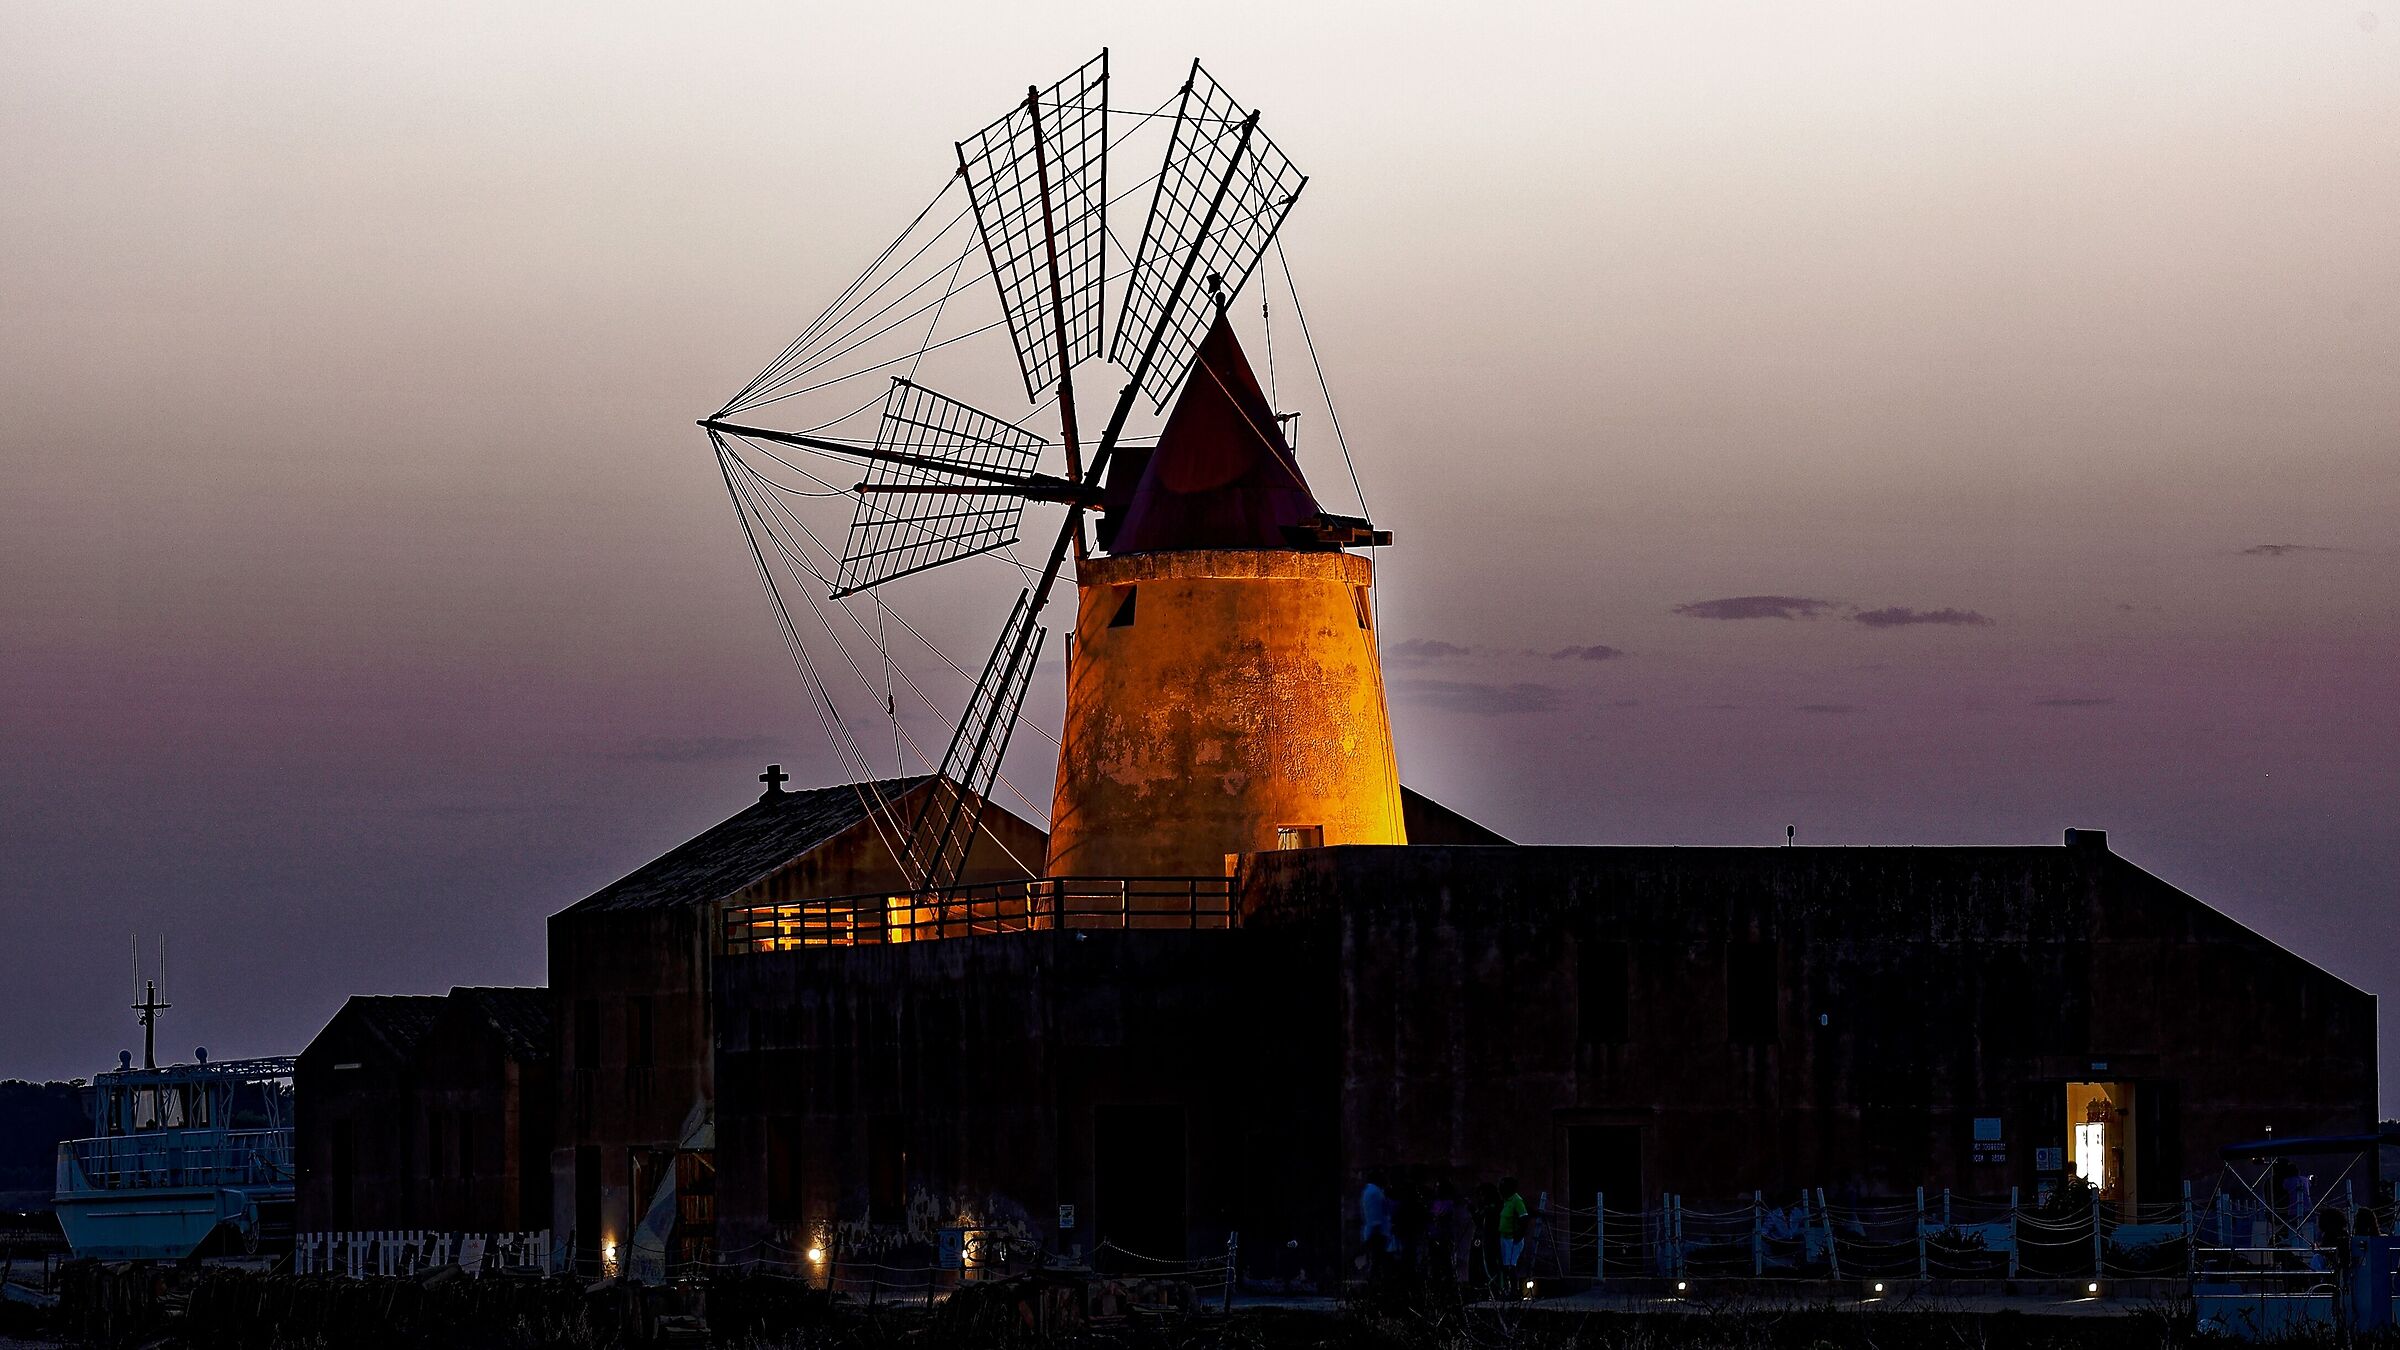 The mill of the salt pans...